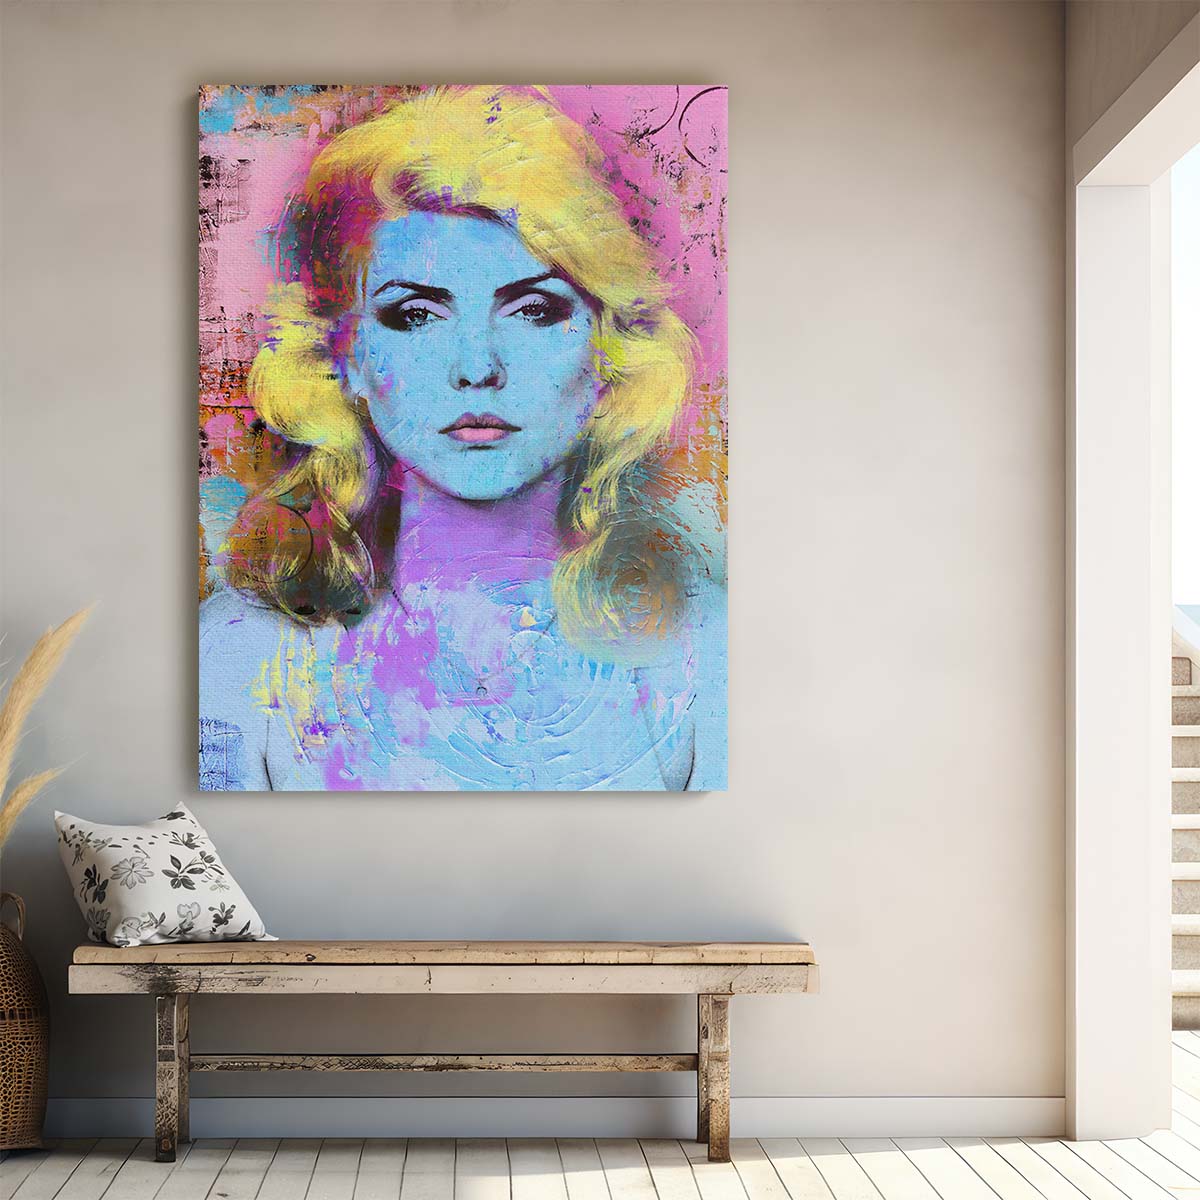 Debbie Harry Circles Graffiti Wall Art by Luxuriance Designs. Made in USA.